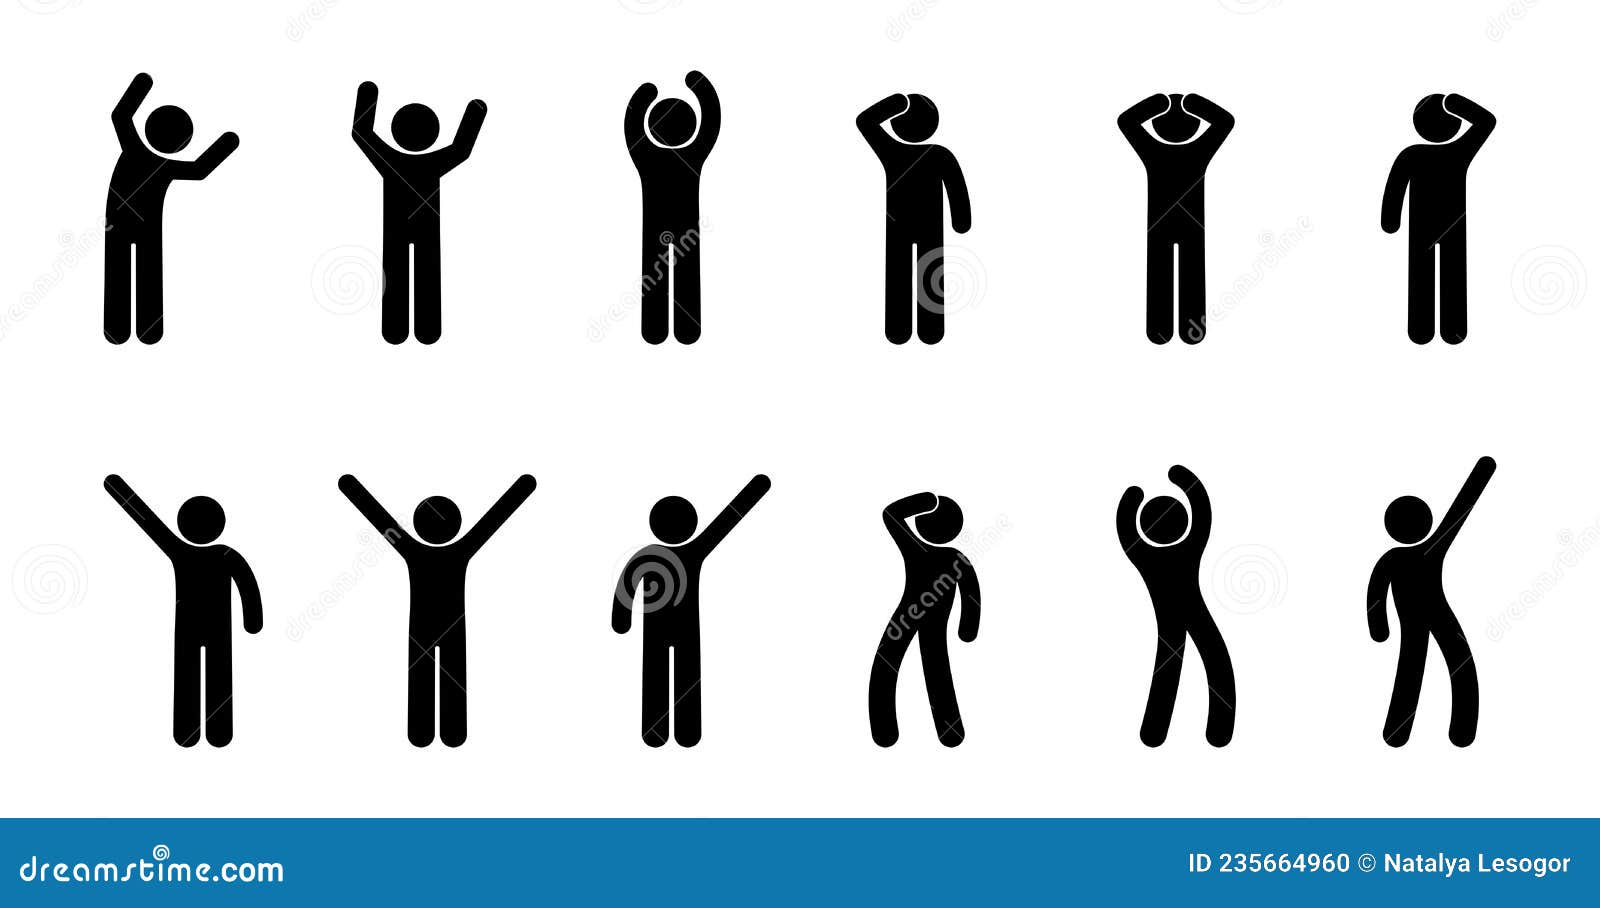 People Waving Their Hands, Various Gestures, Icon Person Gesturing, Human  Silhouette Stands, Stick Figure Stock Vector - Illustration of icon,  isolated: 235664960